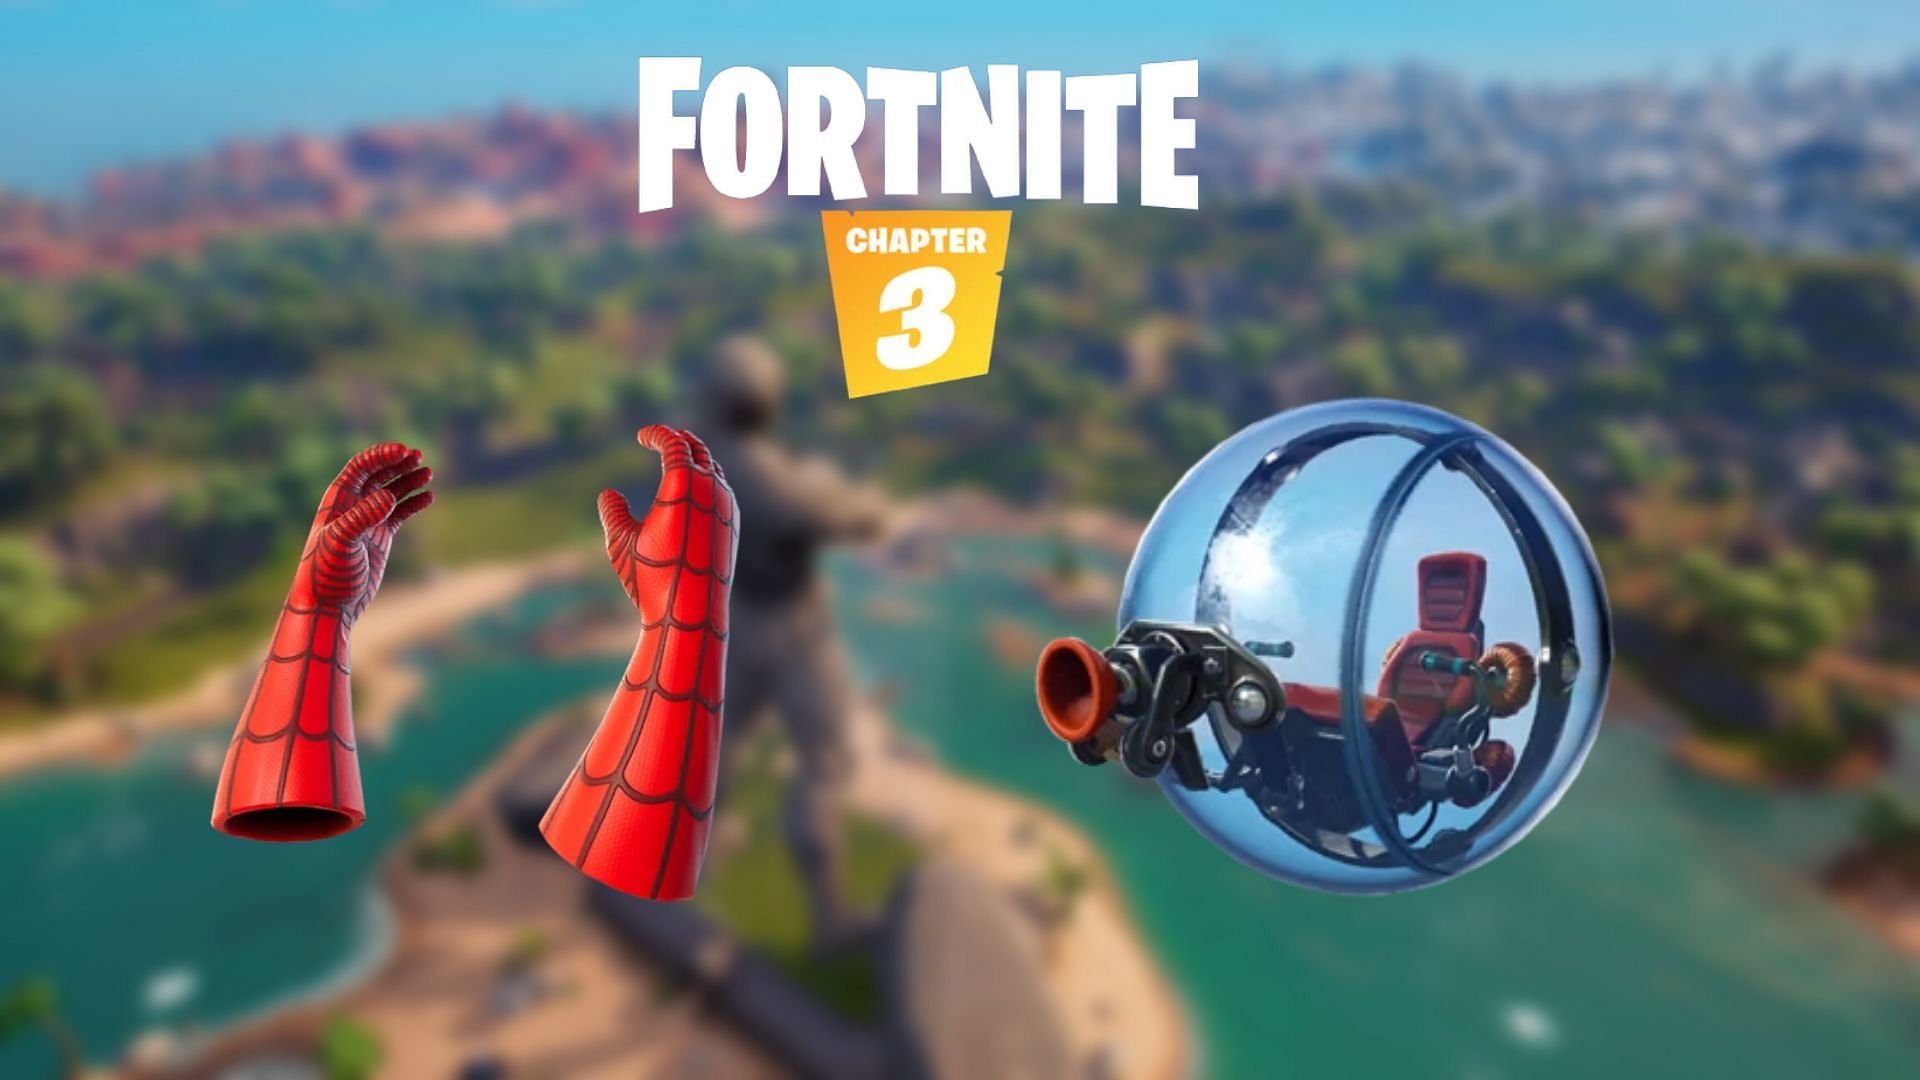 Ballers could be an exciting addition to Fortnite Chapter 3 (Image via Sportskeeda)